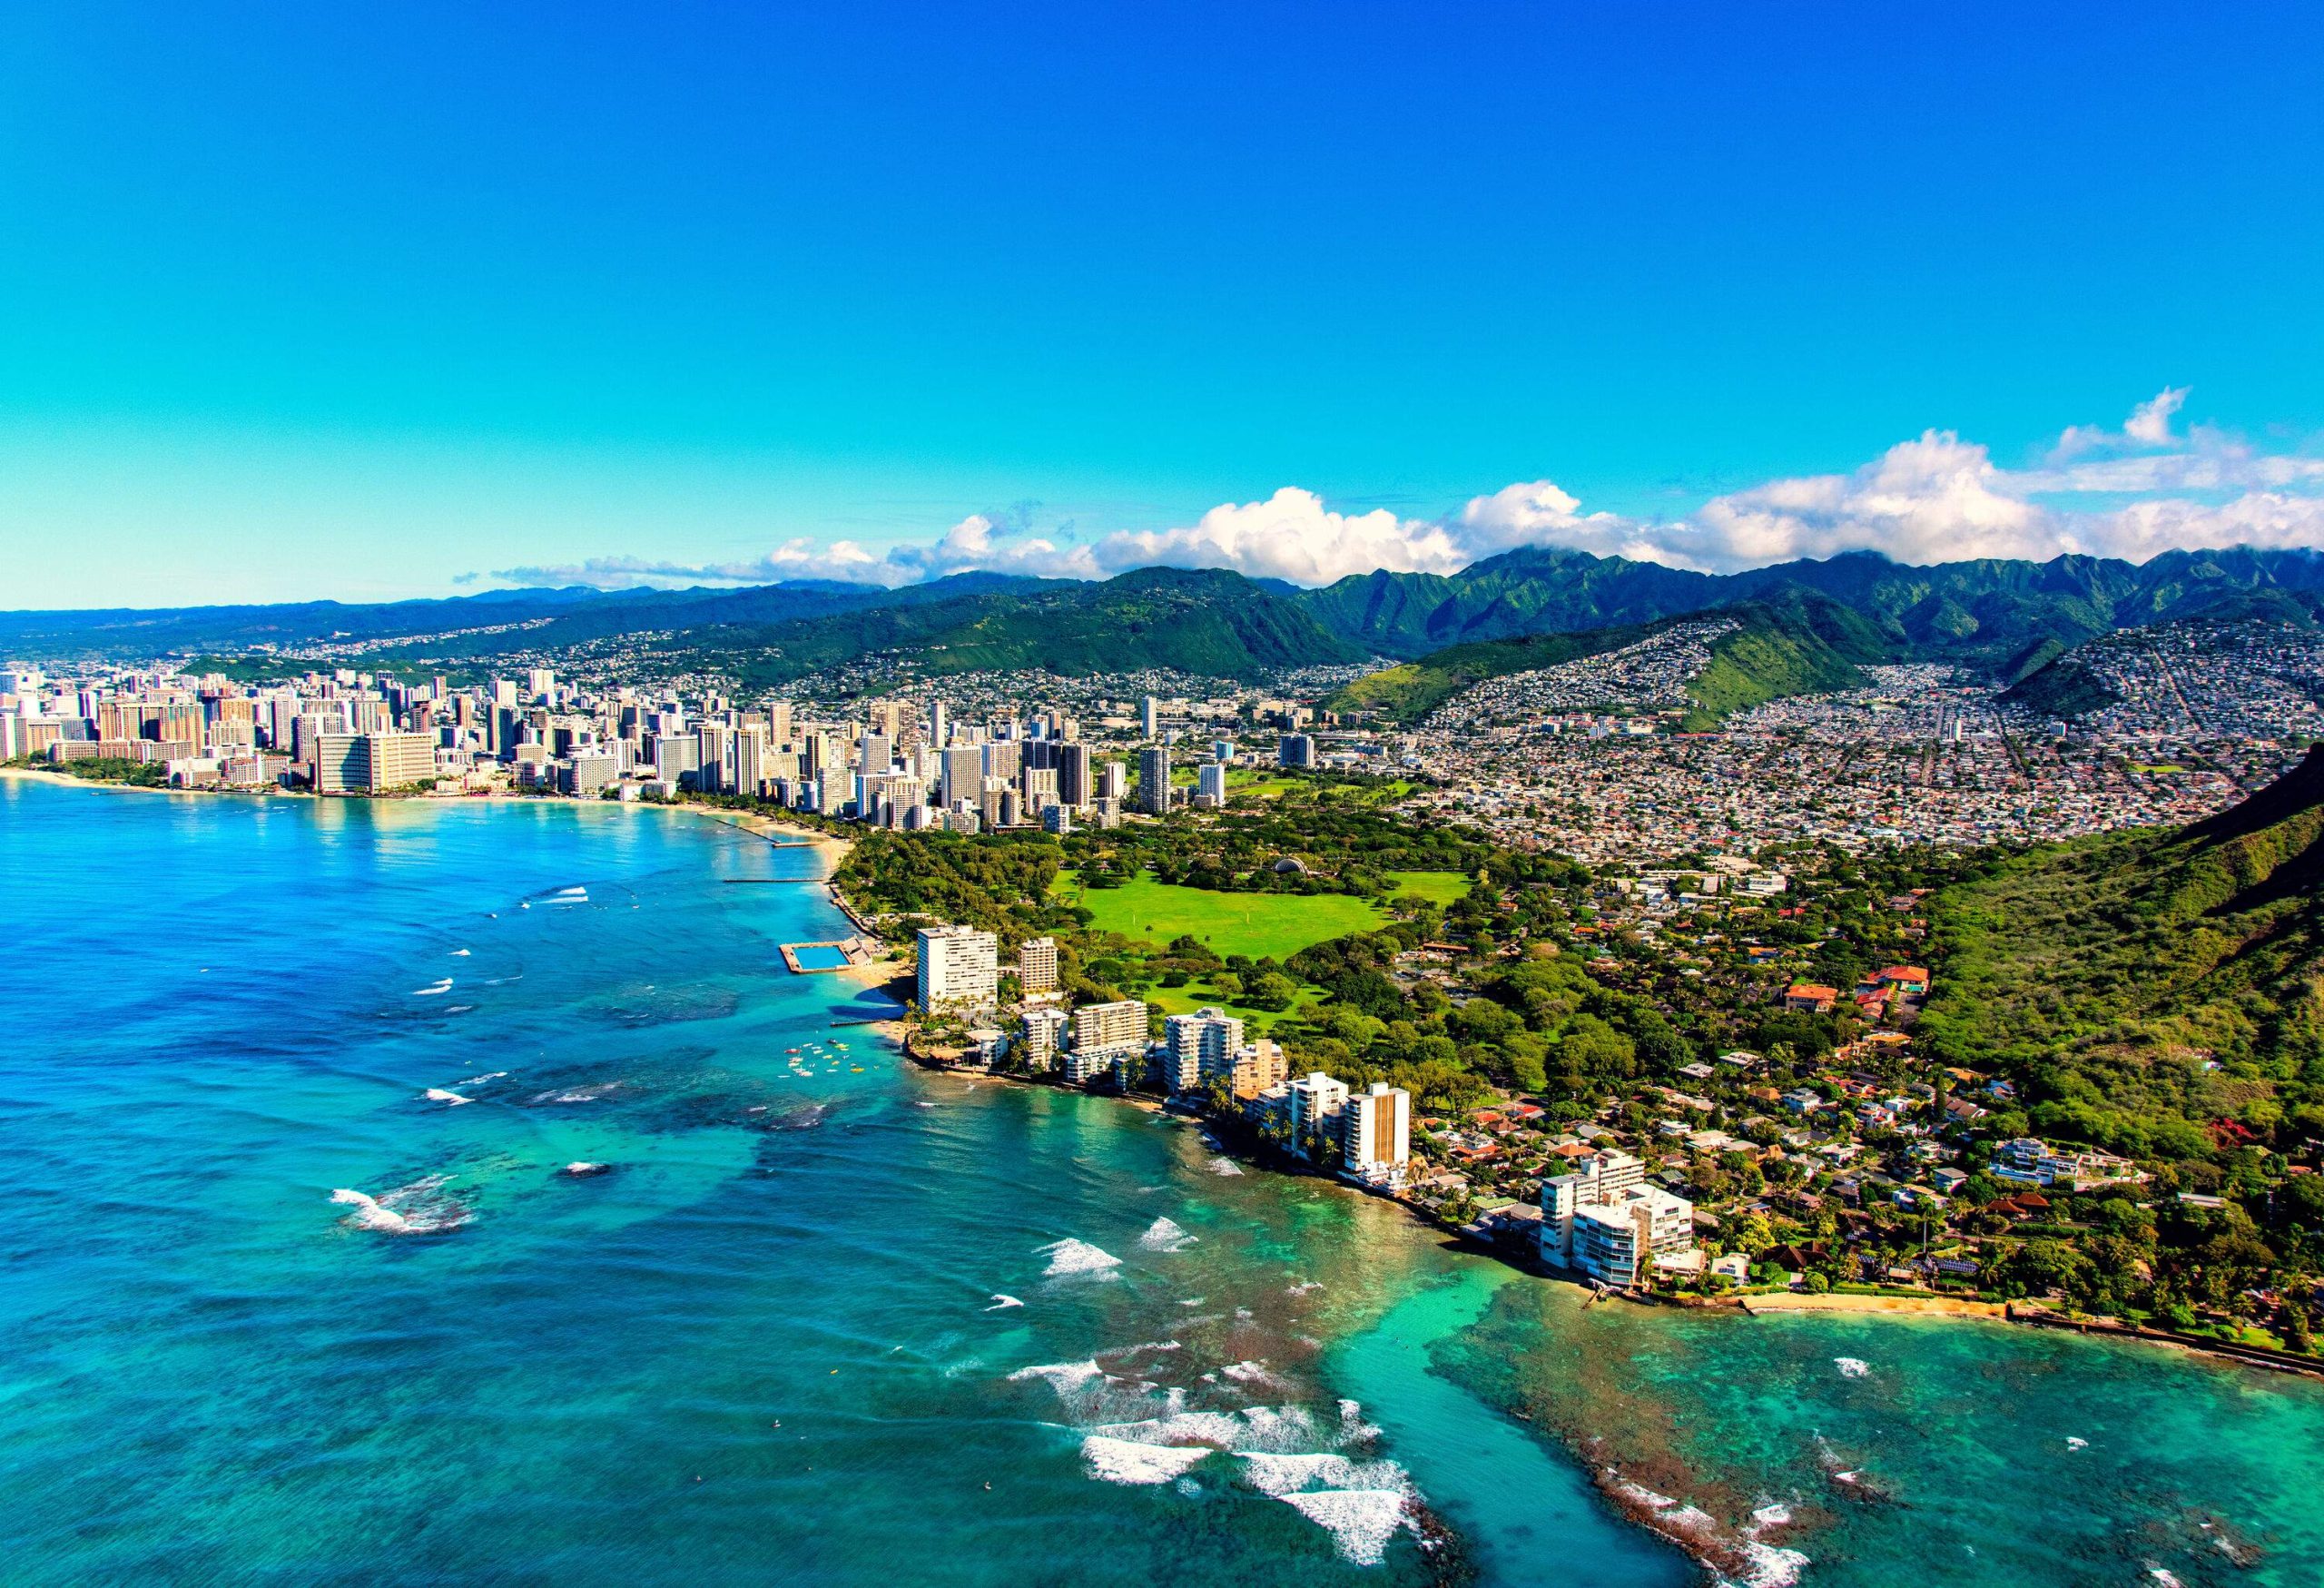 The entire coastline of Honolulu, Hawaii including the base of Diamond Head crater and state park, past the hotel lined Waikiki Beach towards downtown in the distance including the suburban neighborhoods dotting the hills surrounding the city center.